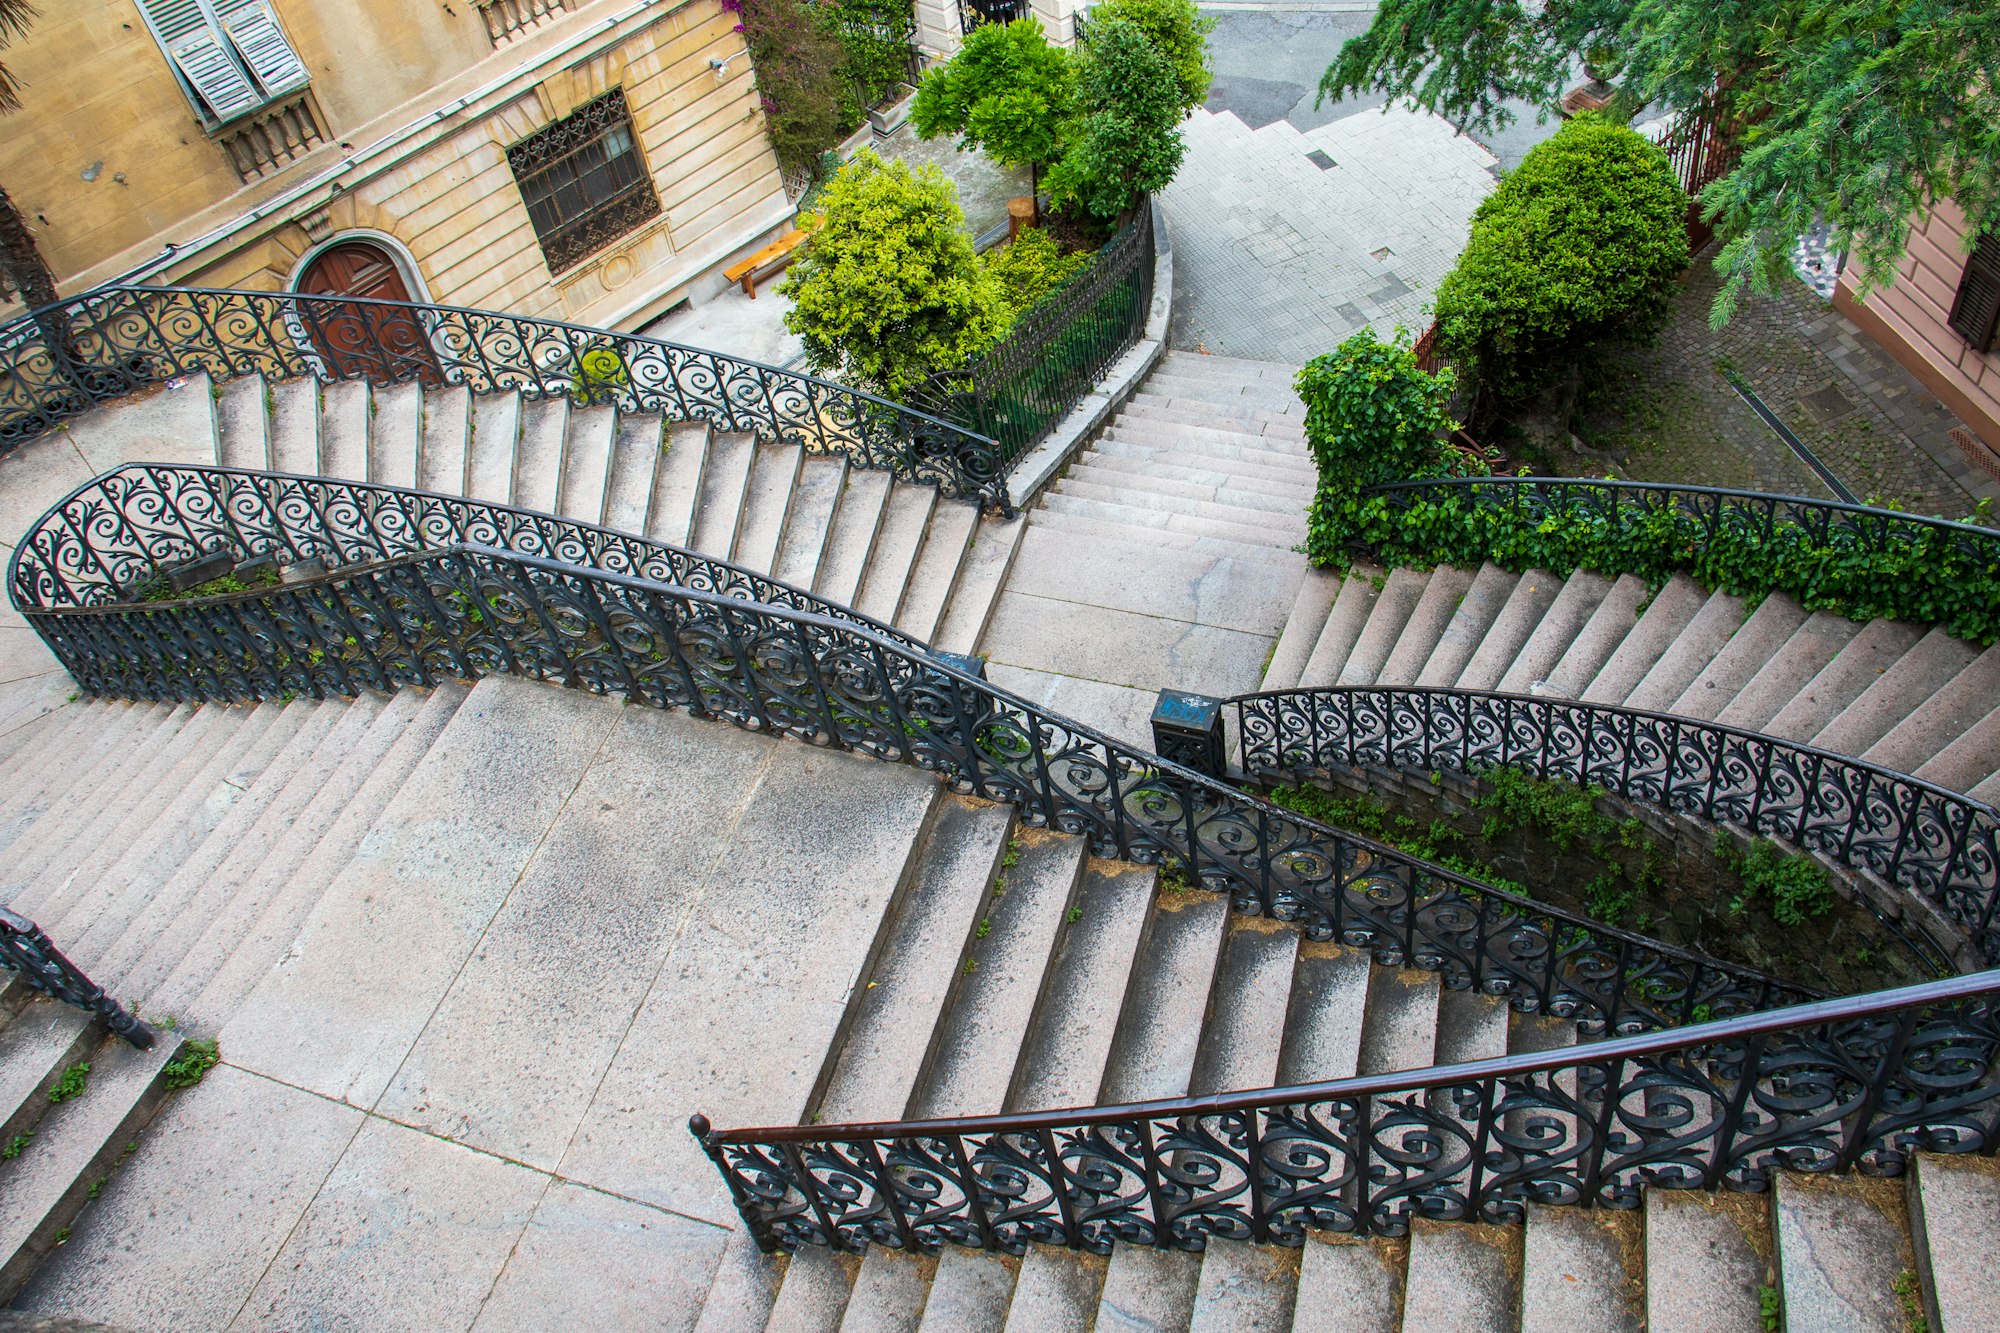 Decorative railings on stairs leading down into Genova, Italy.